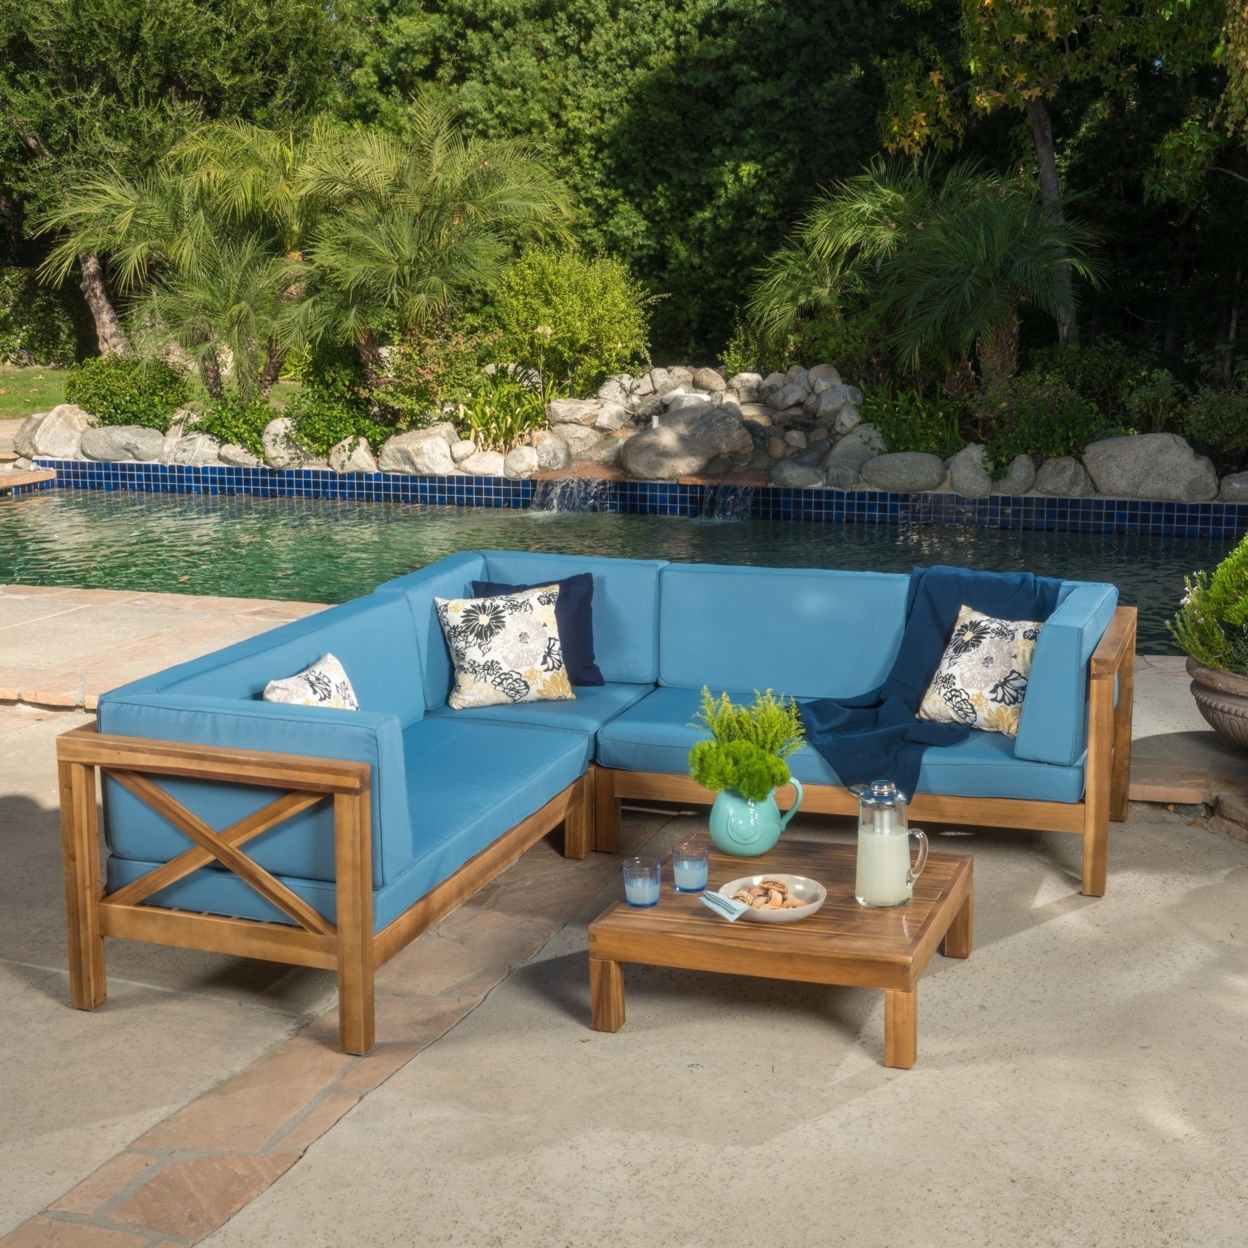 Brava Outdoor 4 Piece V-Shaped Acacia Wood Sectional Sofa And Coffee Table Set - Blue, Natural